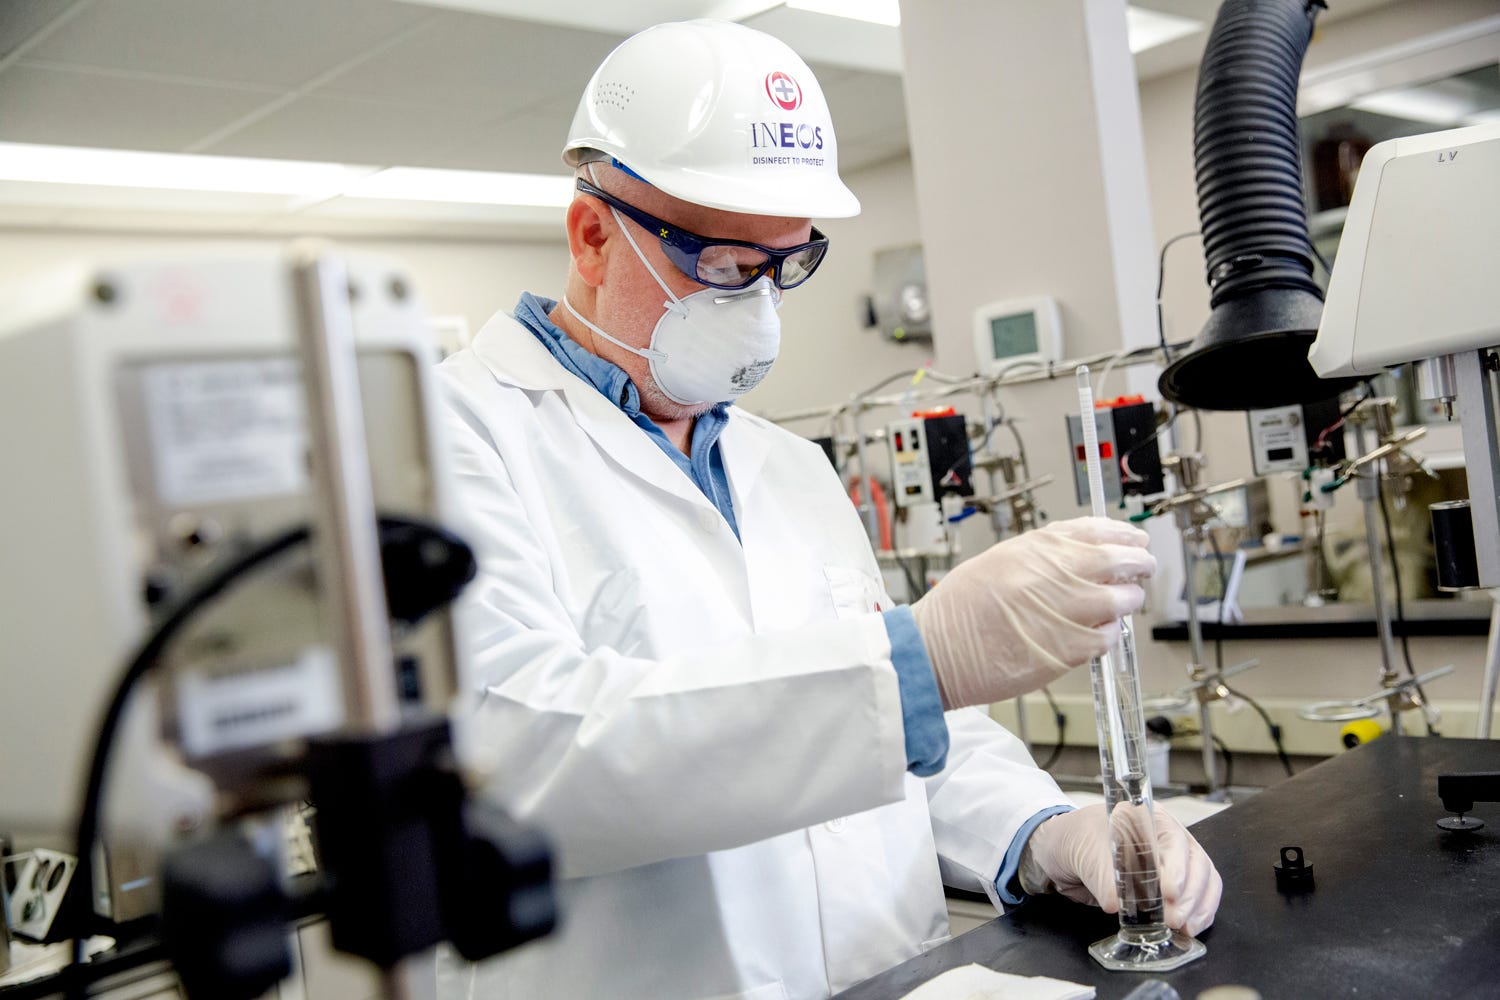 a man in a lab coat and hard hat working in an ineos lab